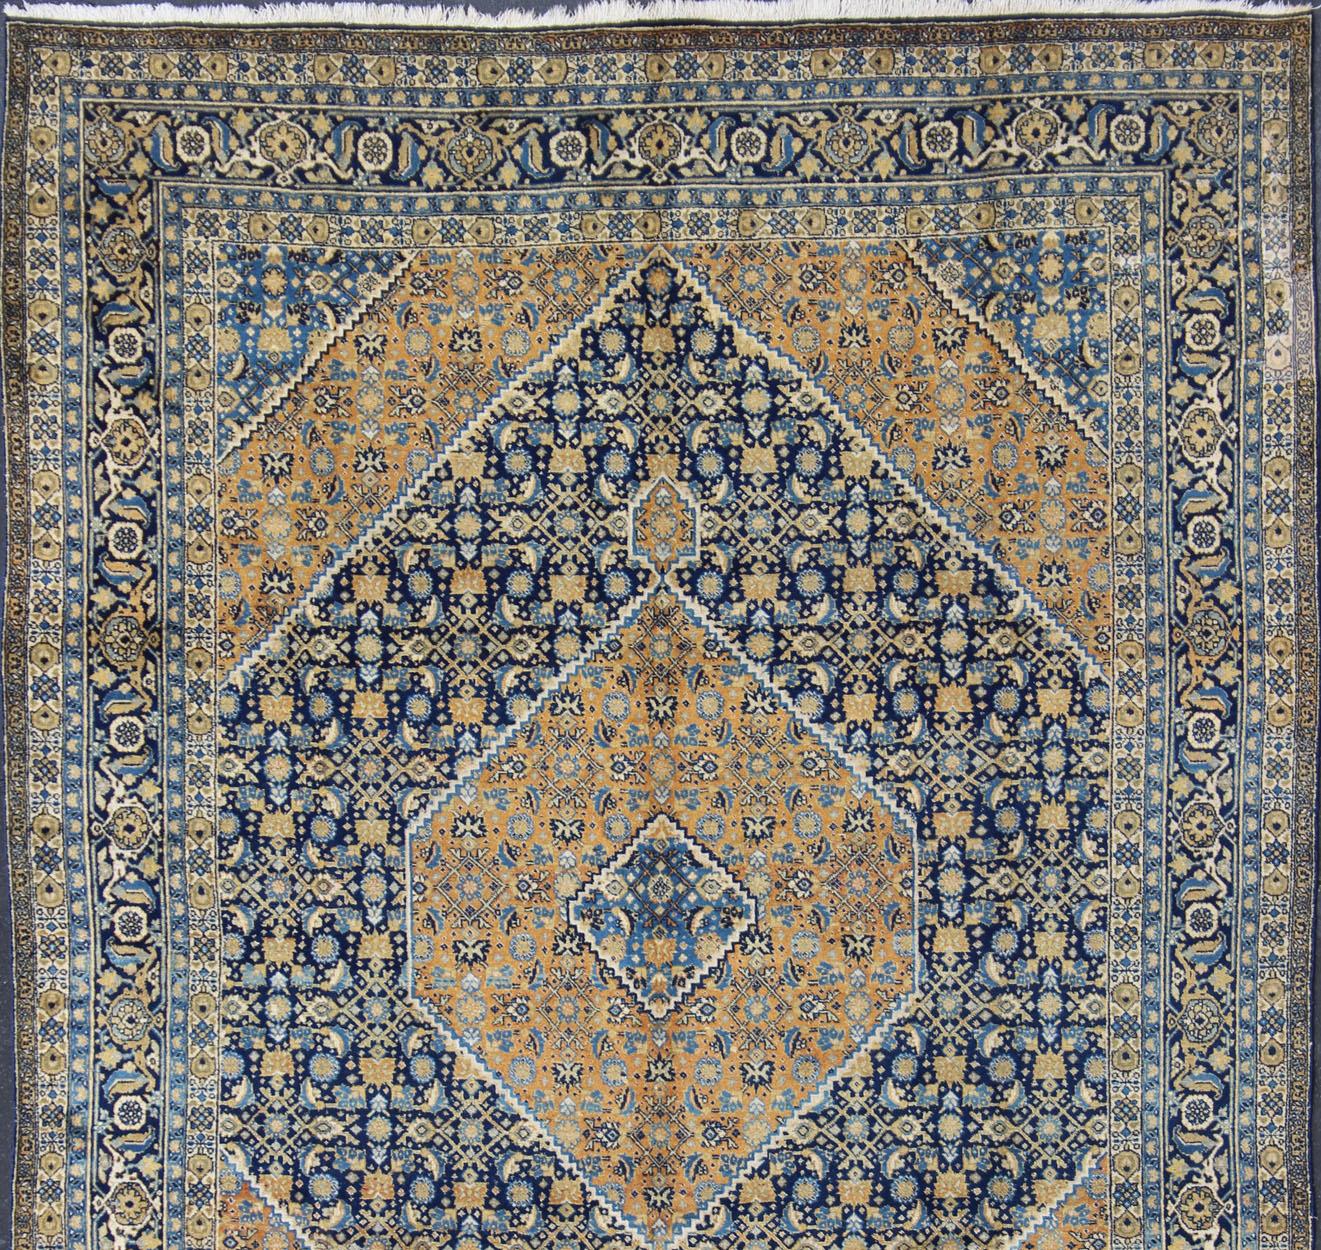 Antique Persian Tabriz Rug with Medallion And A Variety of Blue's and Gold's. Keivan Woven Arts / Rug / 16-1205, country of origin / type: Iran / Tabriz, circa 1920. Classic geometric Tabriz.
Measures: 9'3 x 12'5.
This antique Persian Tabriz rug